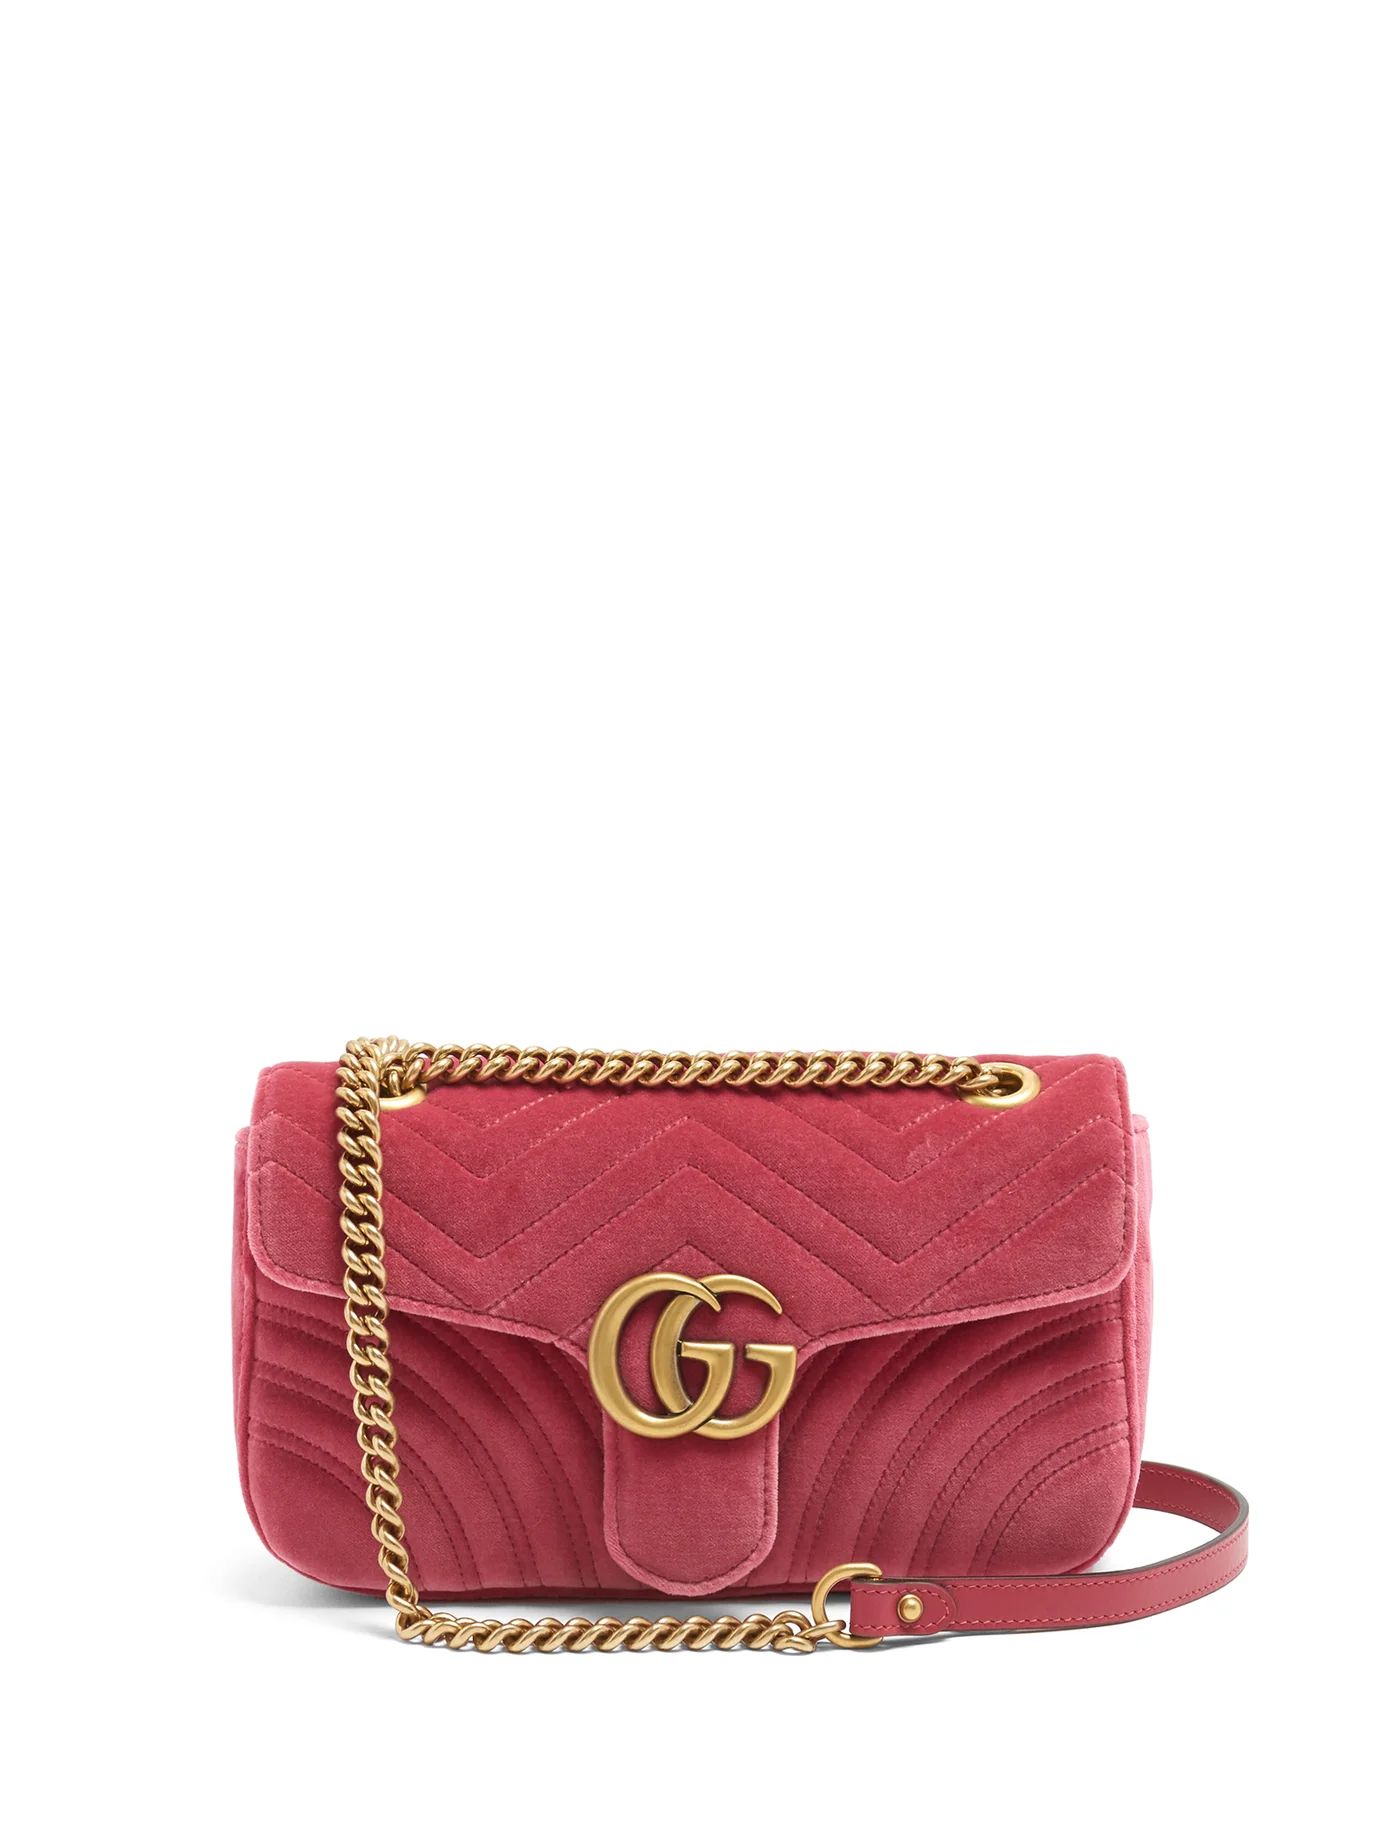 GG Marmont small quilted velvet cross-body bag | Matches (US)